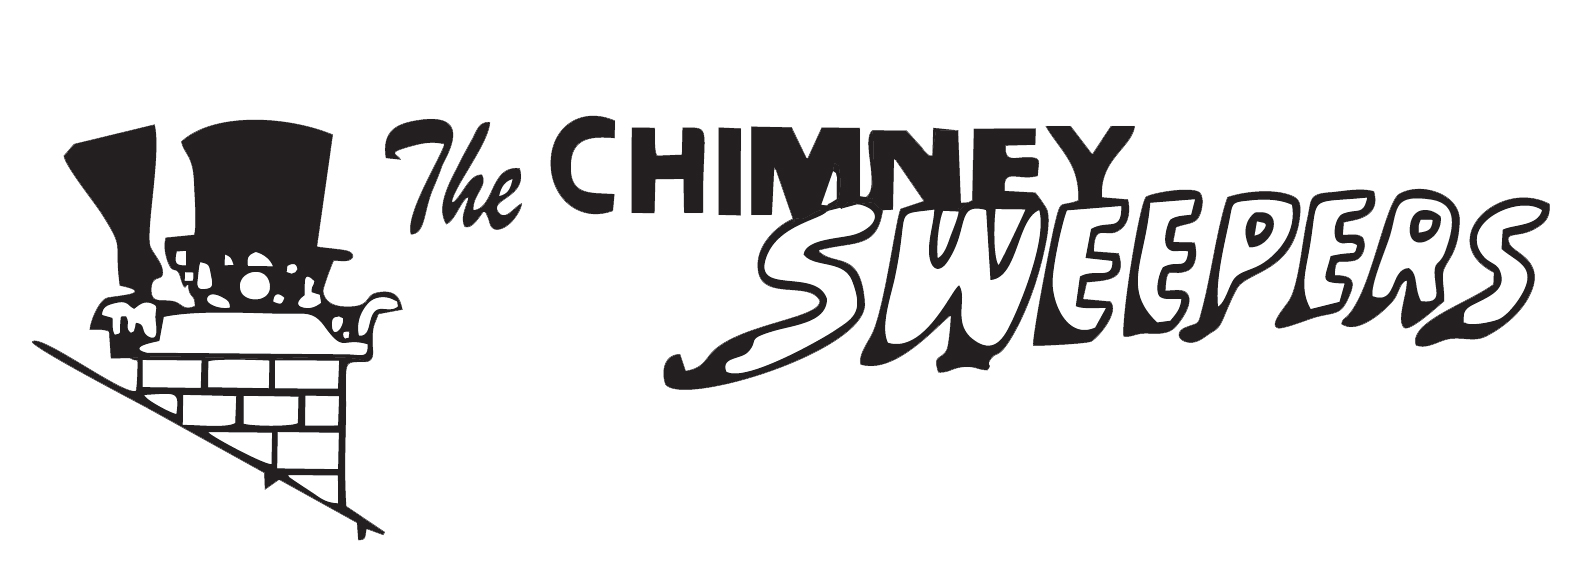 Chimney Sweepers